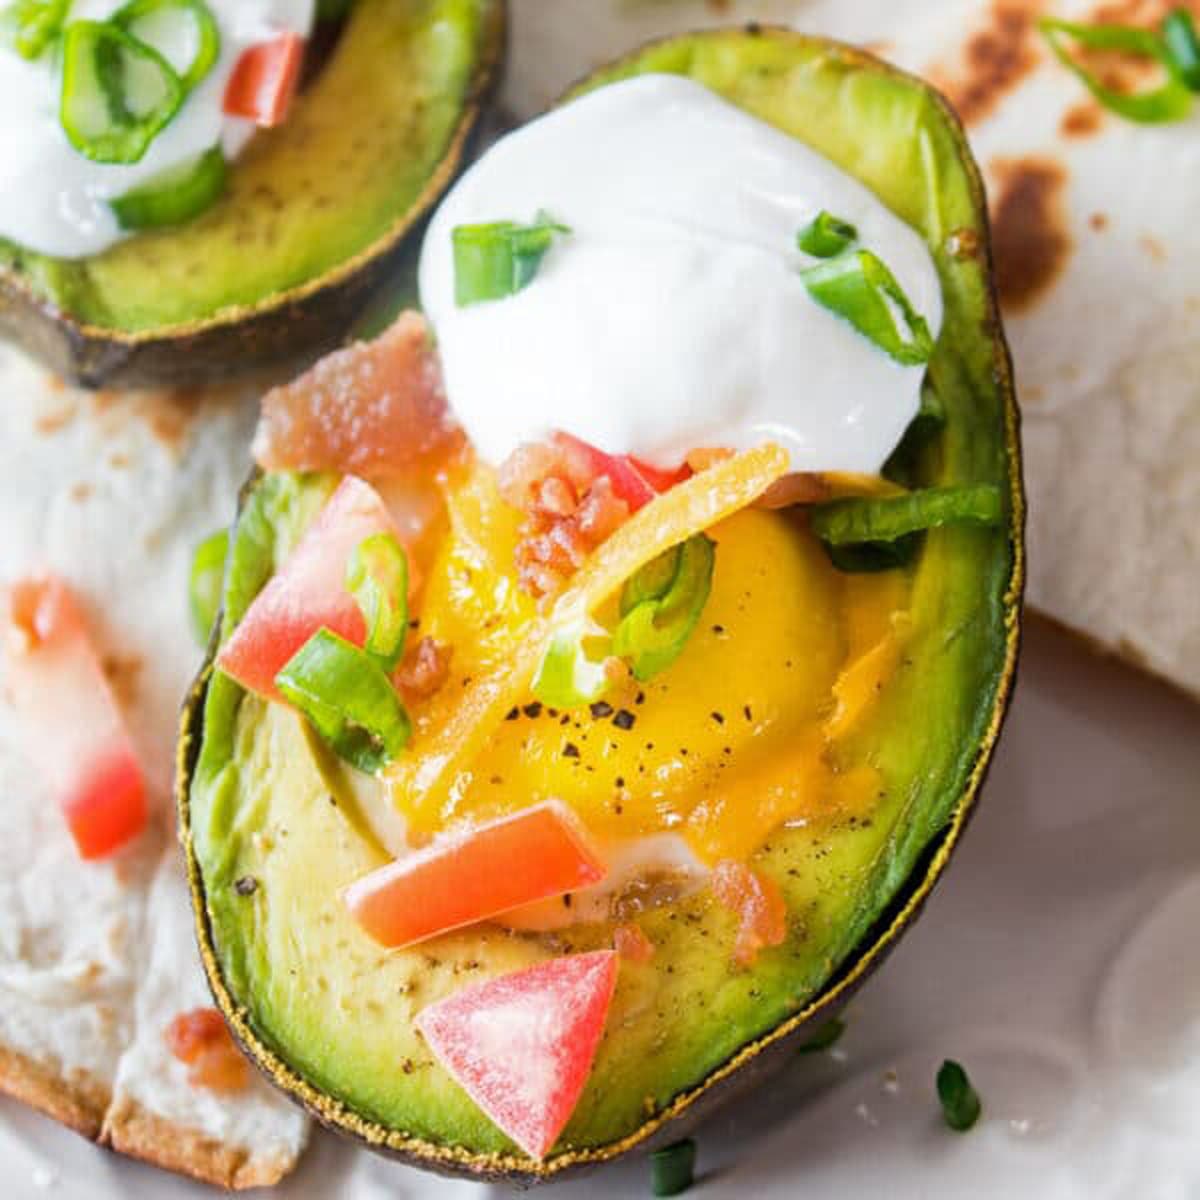 Avocado egg bake loaded with tomatoes, bacon, egg, and cheese, on a table.